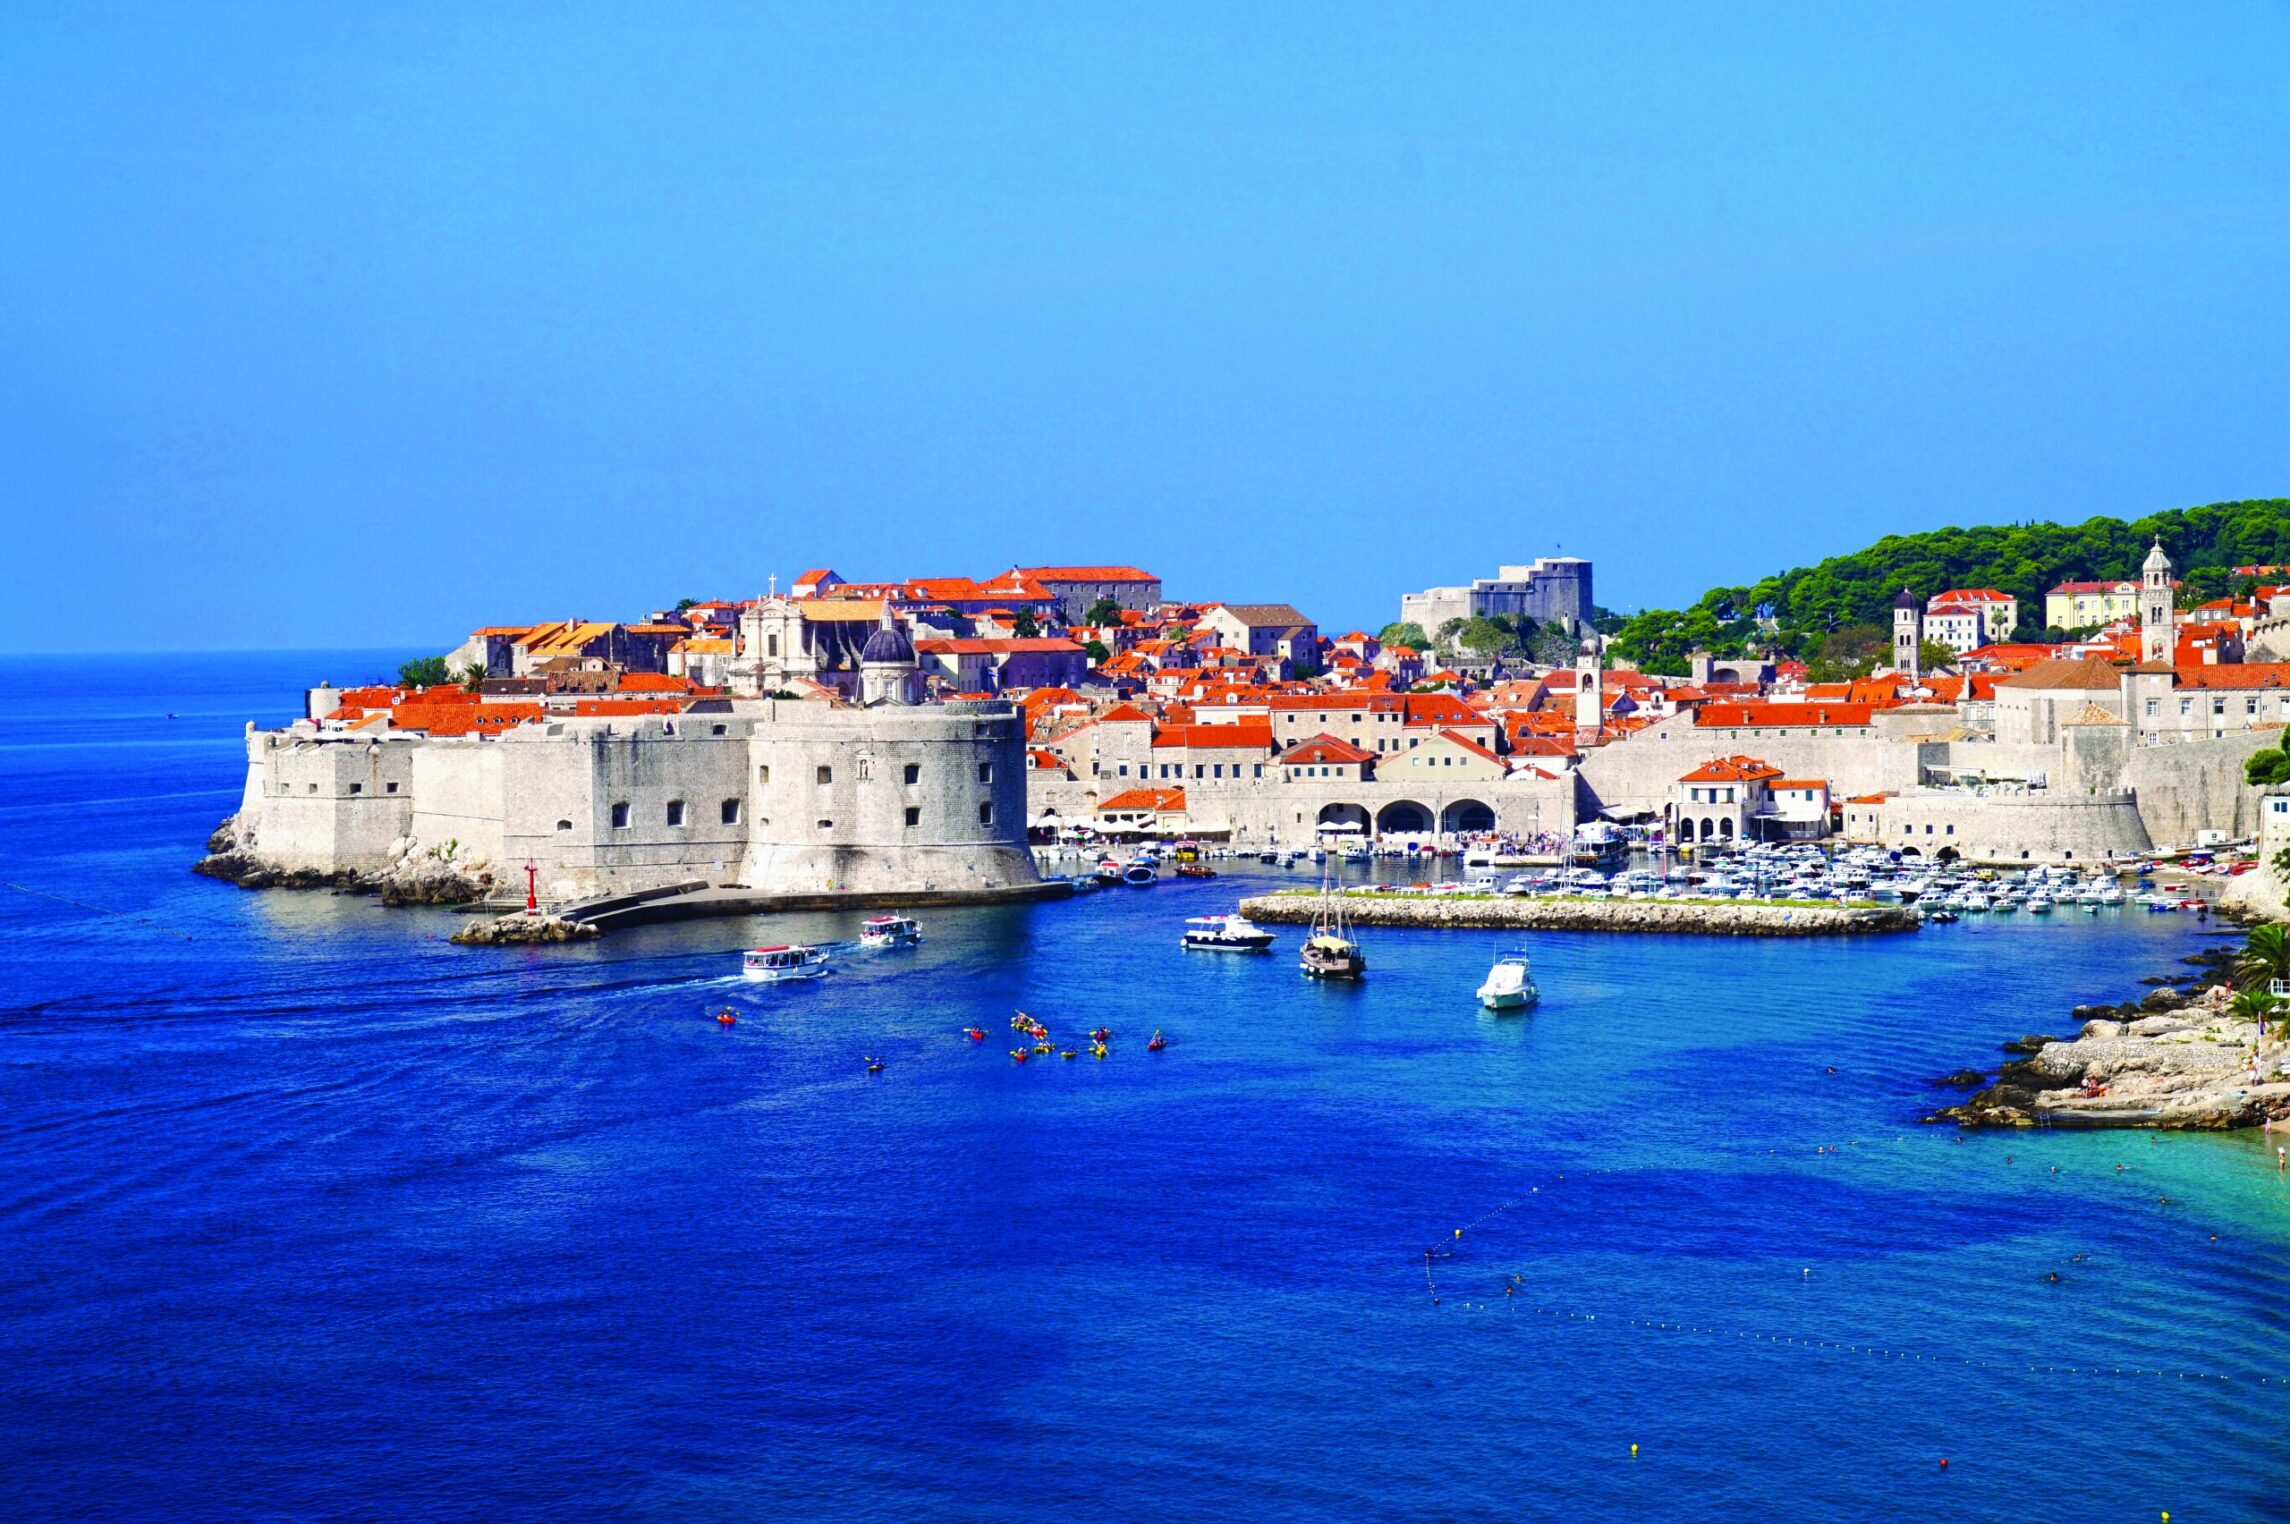 Sail with Travelmarvel on an eight-day Adriatic cruise for just $1495